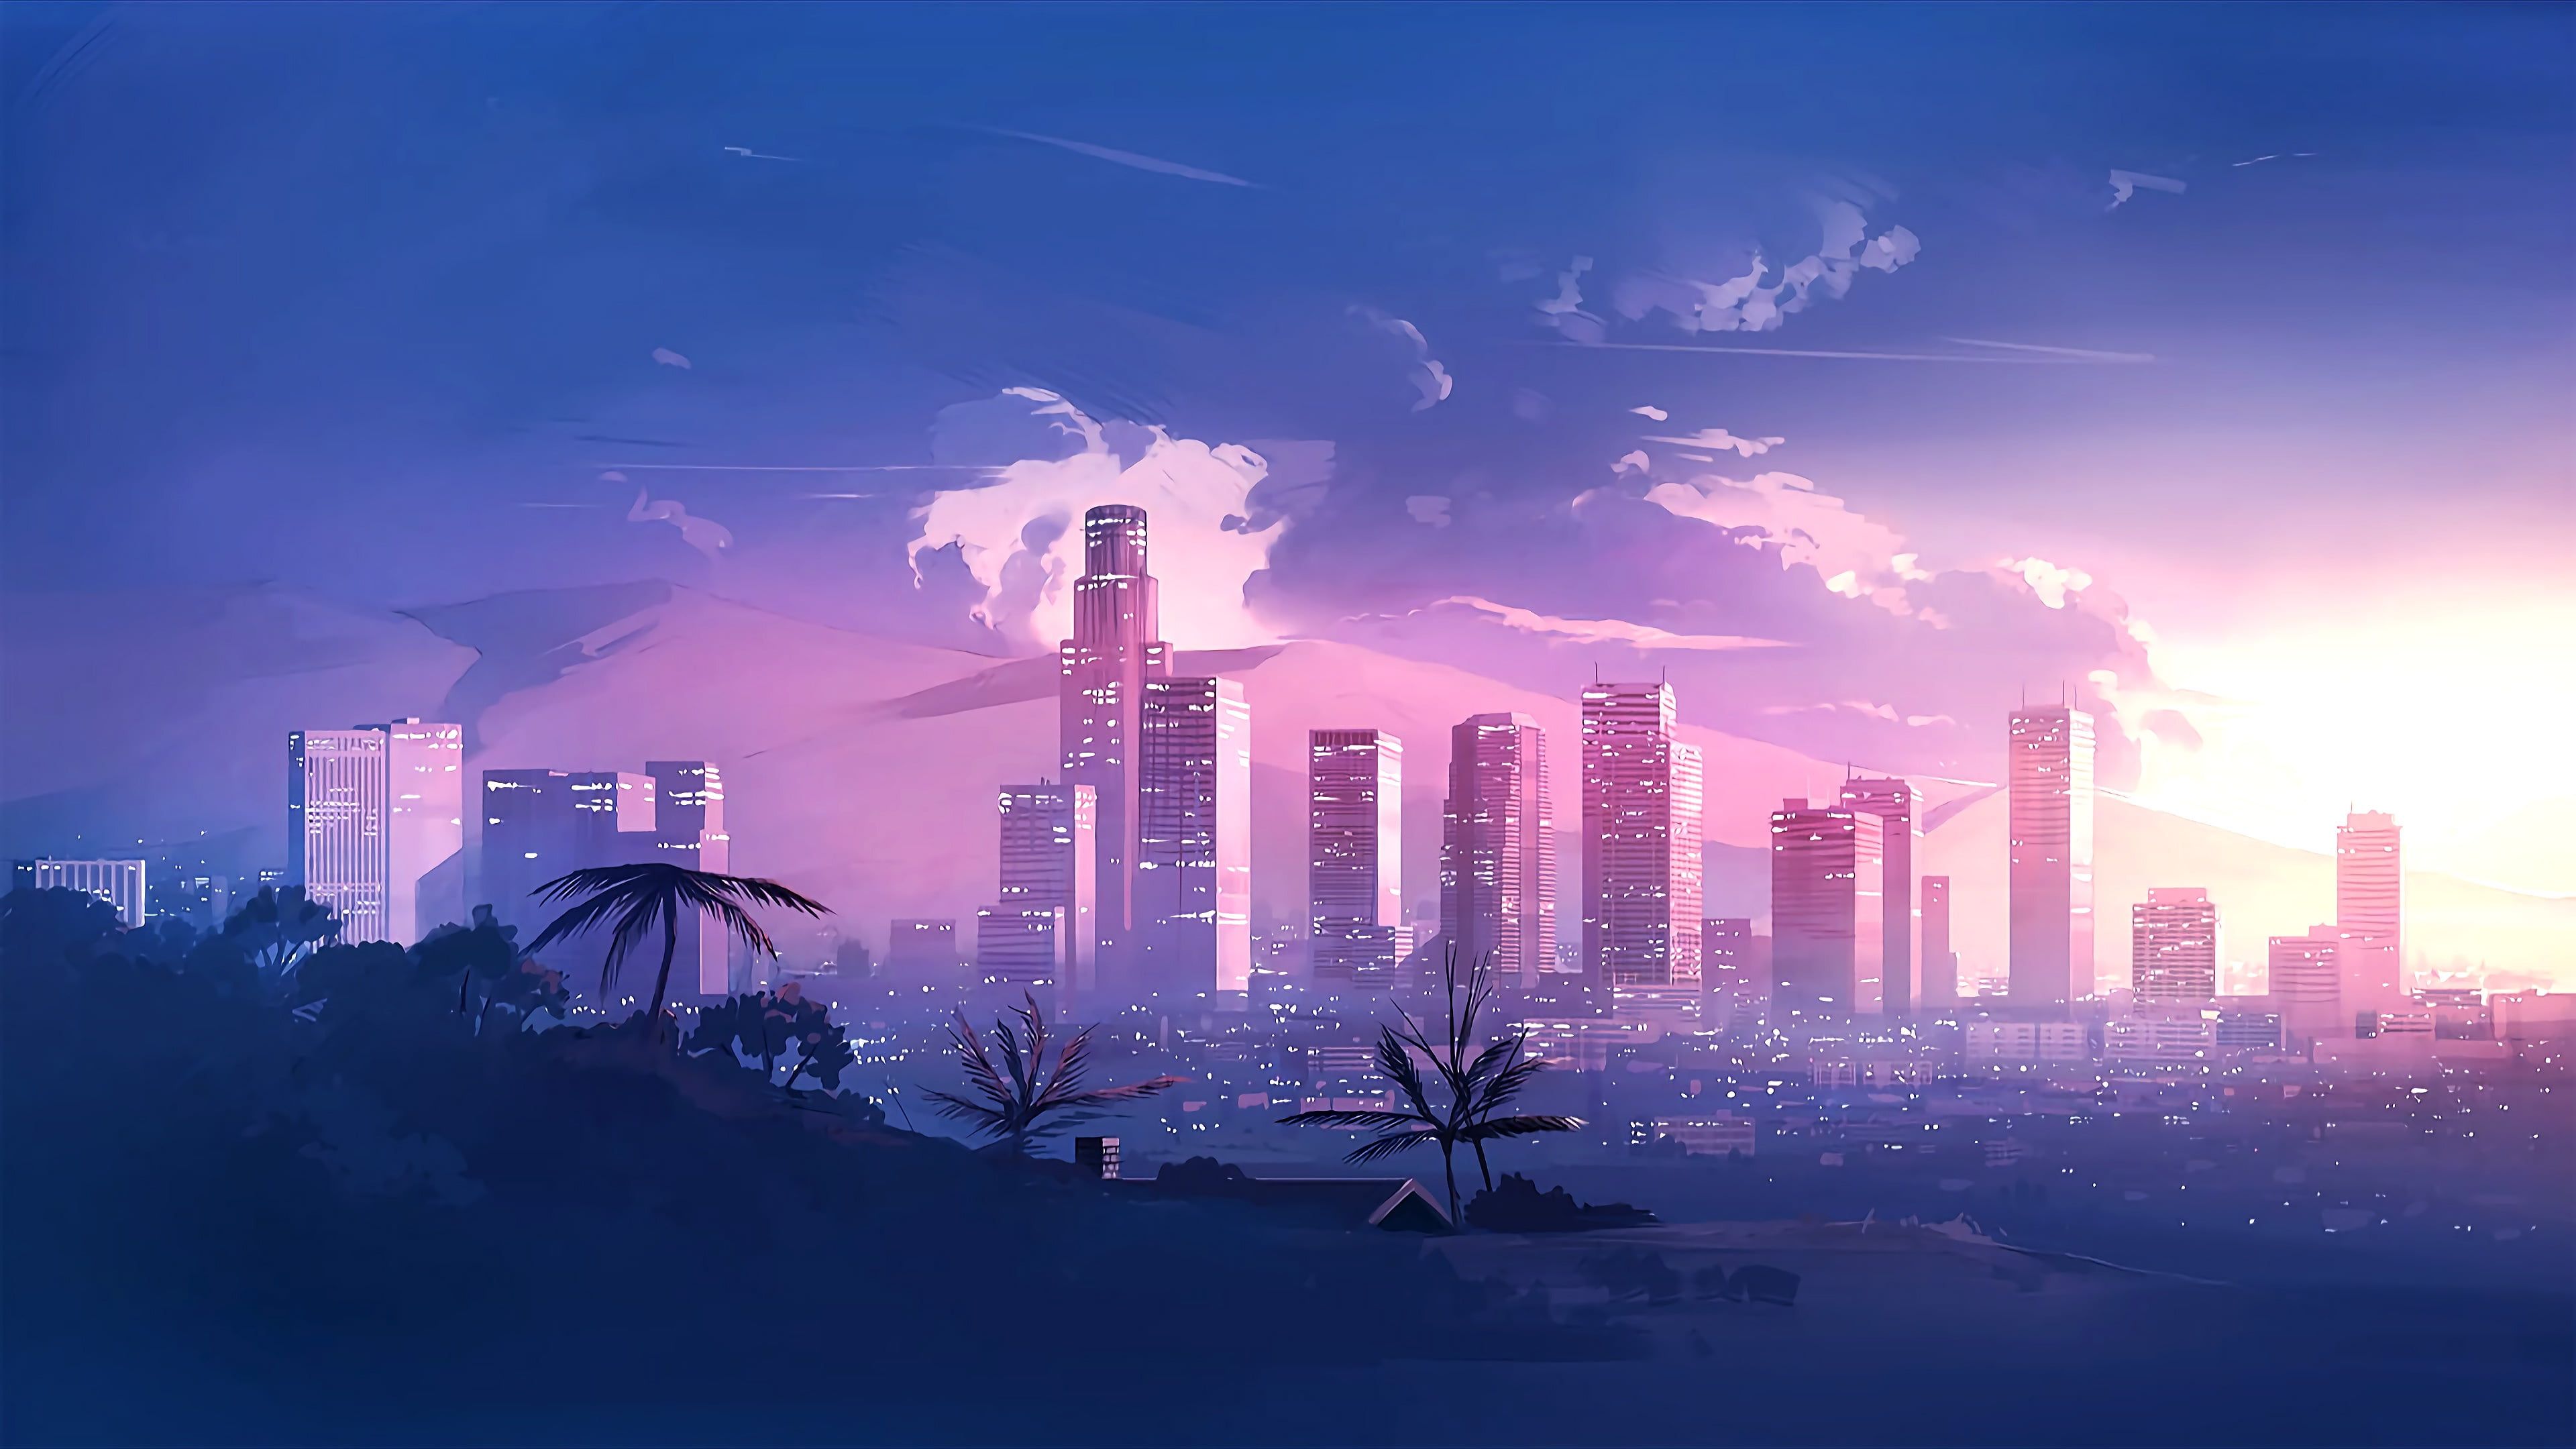 Music The city #Style #Landscape s #Style #Neon #Illustration 's #Synth #Retrowave #Synthwave New. Desktop wallpaper art, City wallpaper, Scenery wallpaper